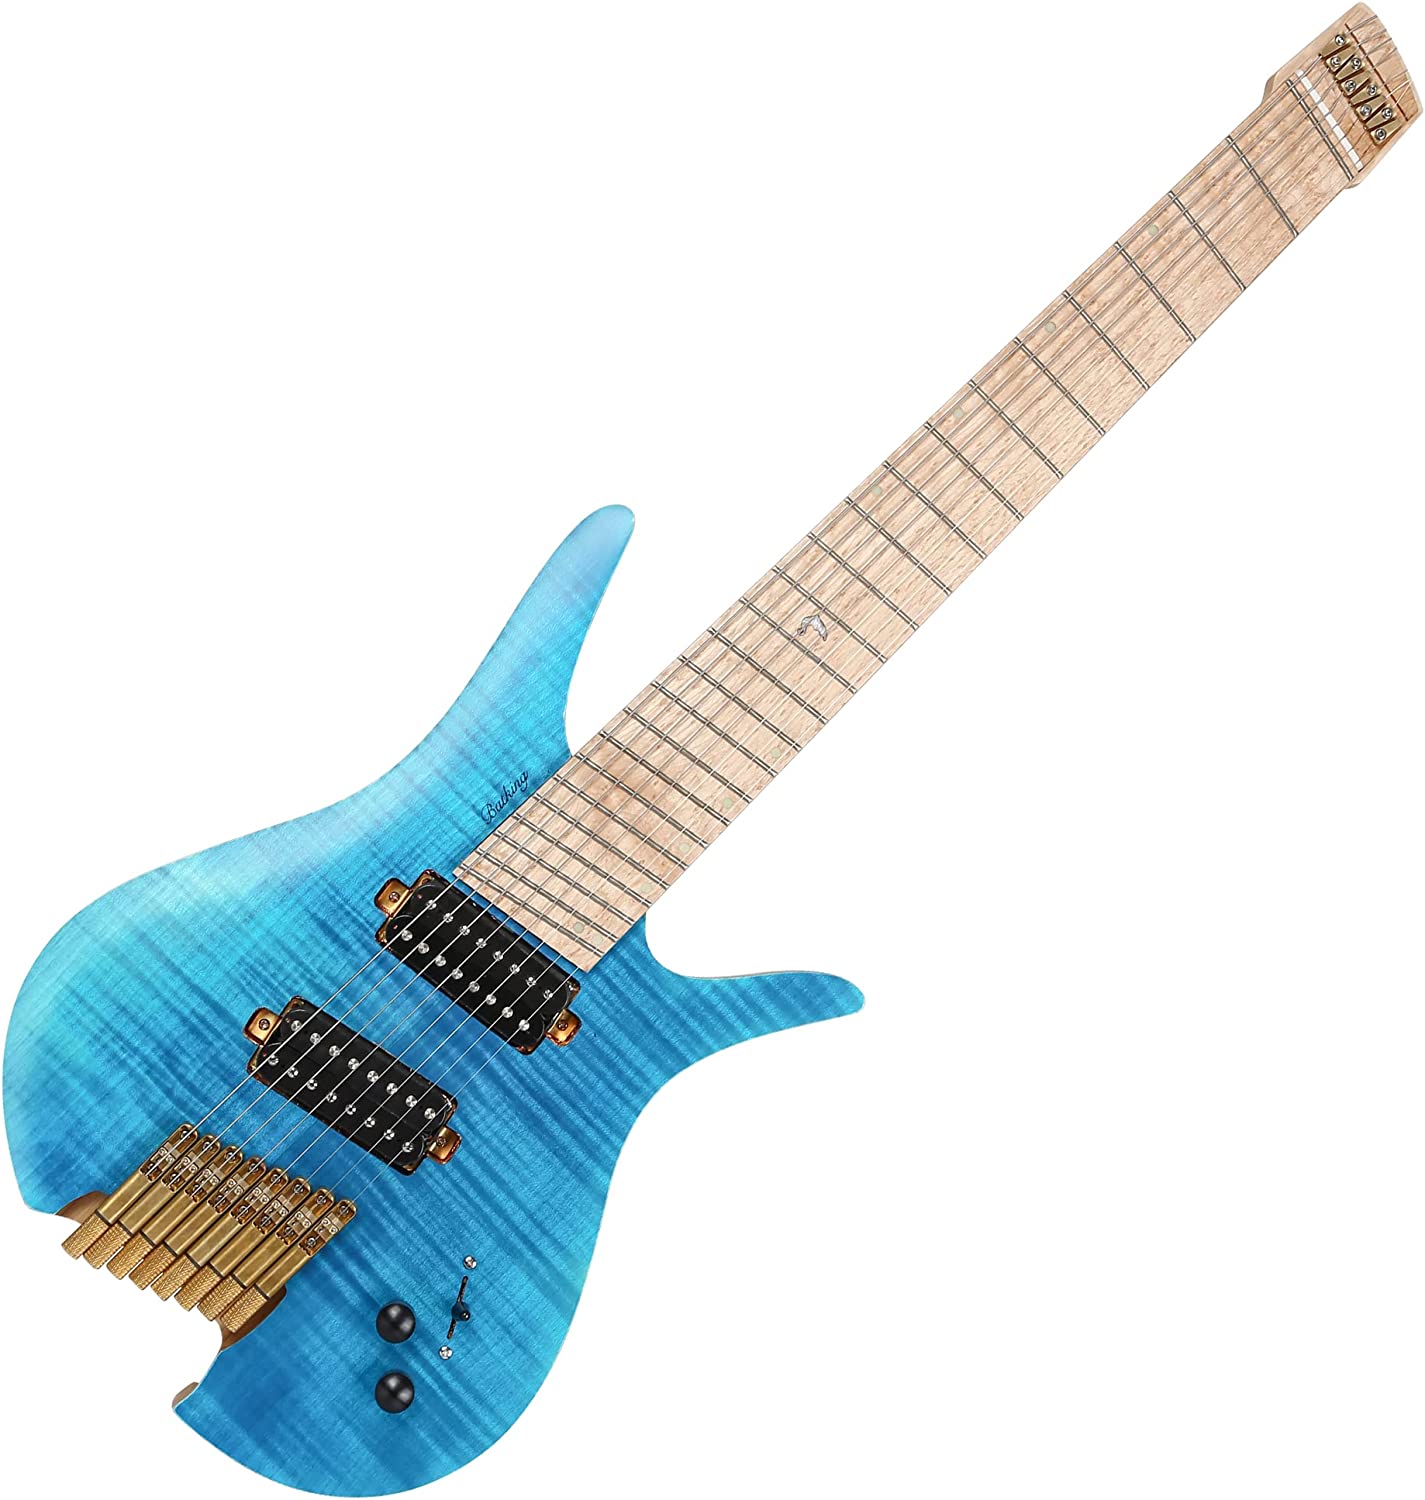 Batking 8 String Fanned Fret Headless Electric Travel Guitar with Multiscale Birdeyes Fingerboard Of Luminous Inlay(HF12)